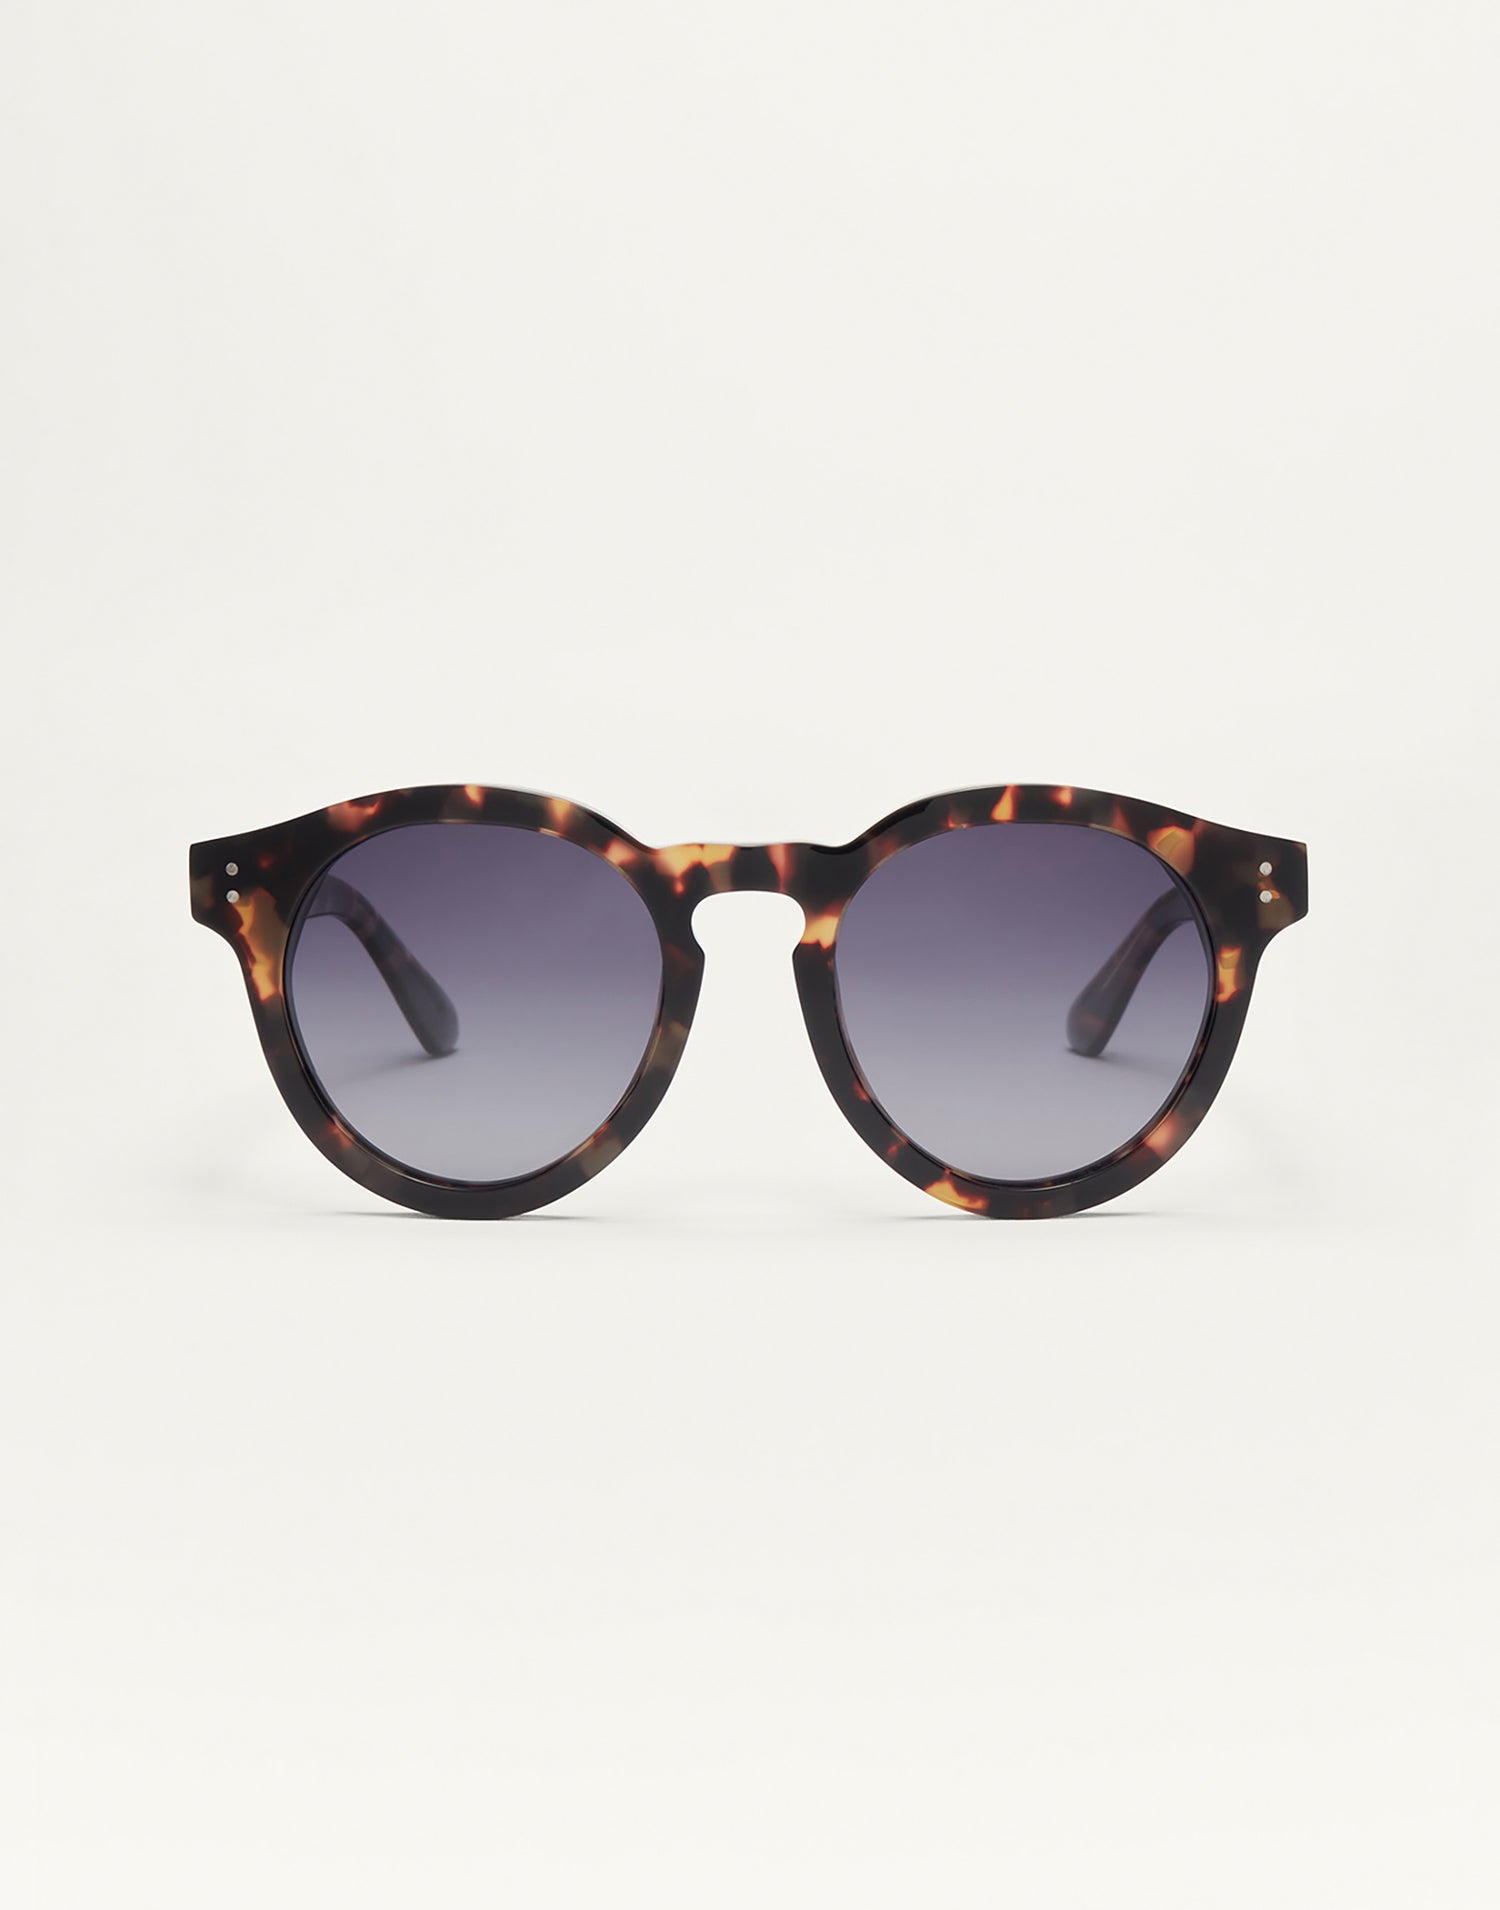 Out of Office Sunglasses by Z Supply in Brown Tortoise - Front View